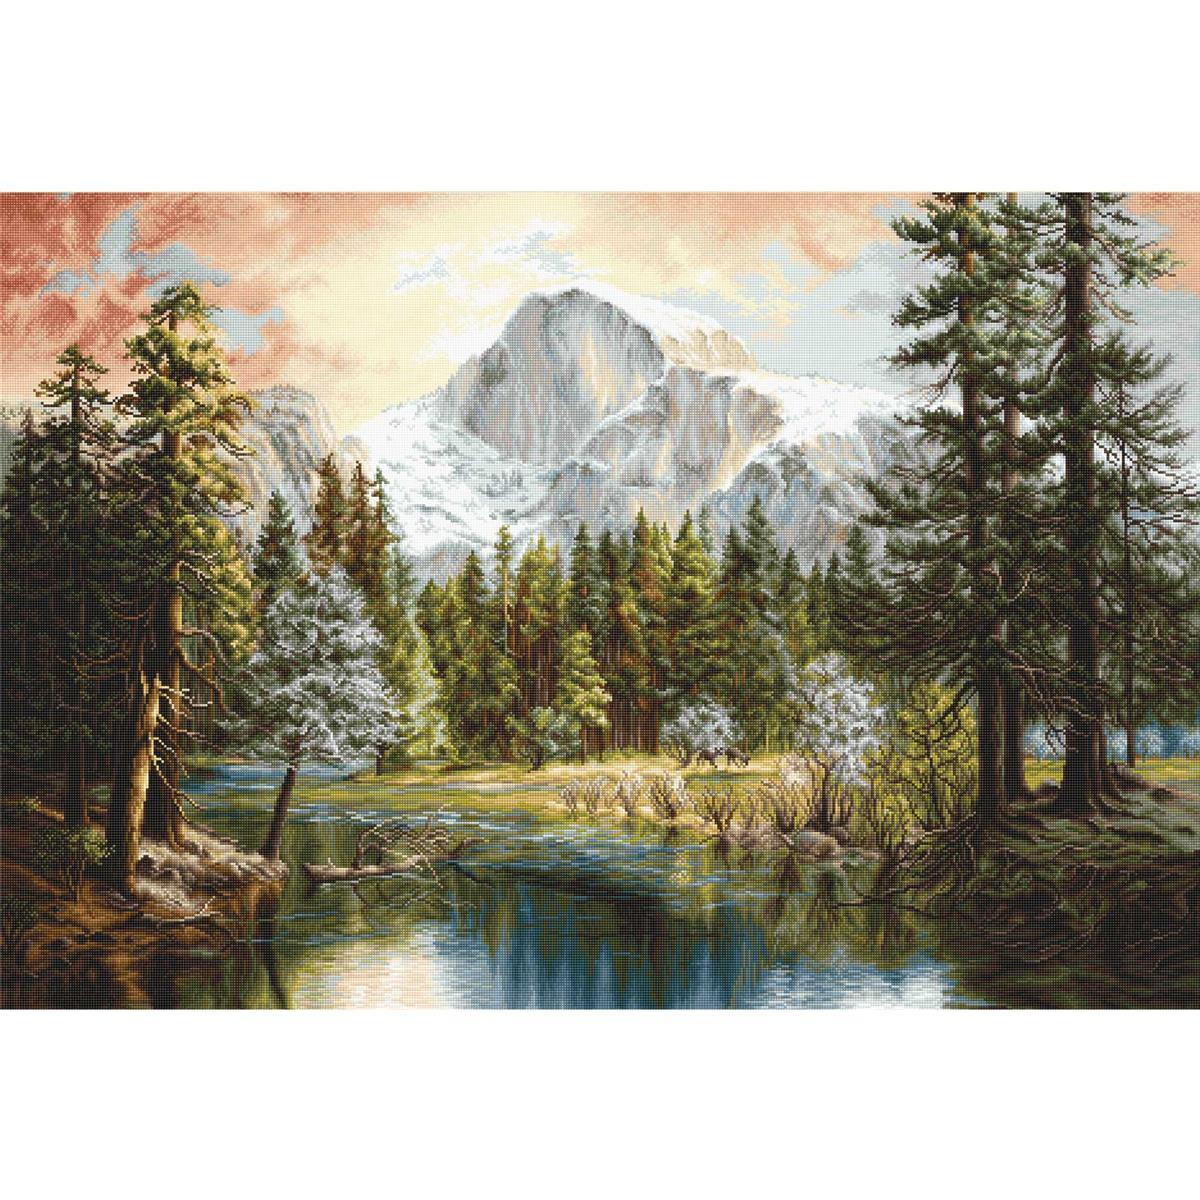 Luca-S counted cross stitch kit "Nature´s...